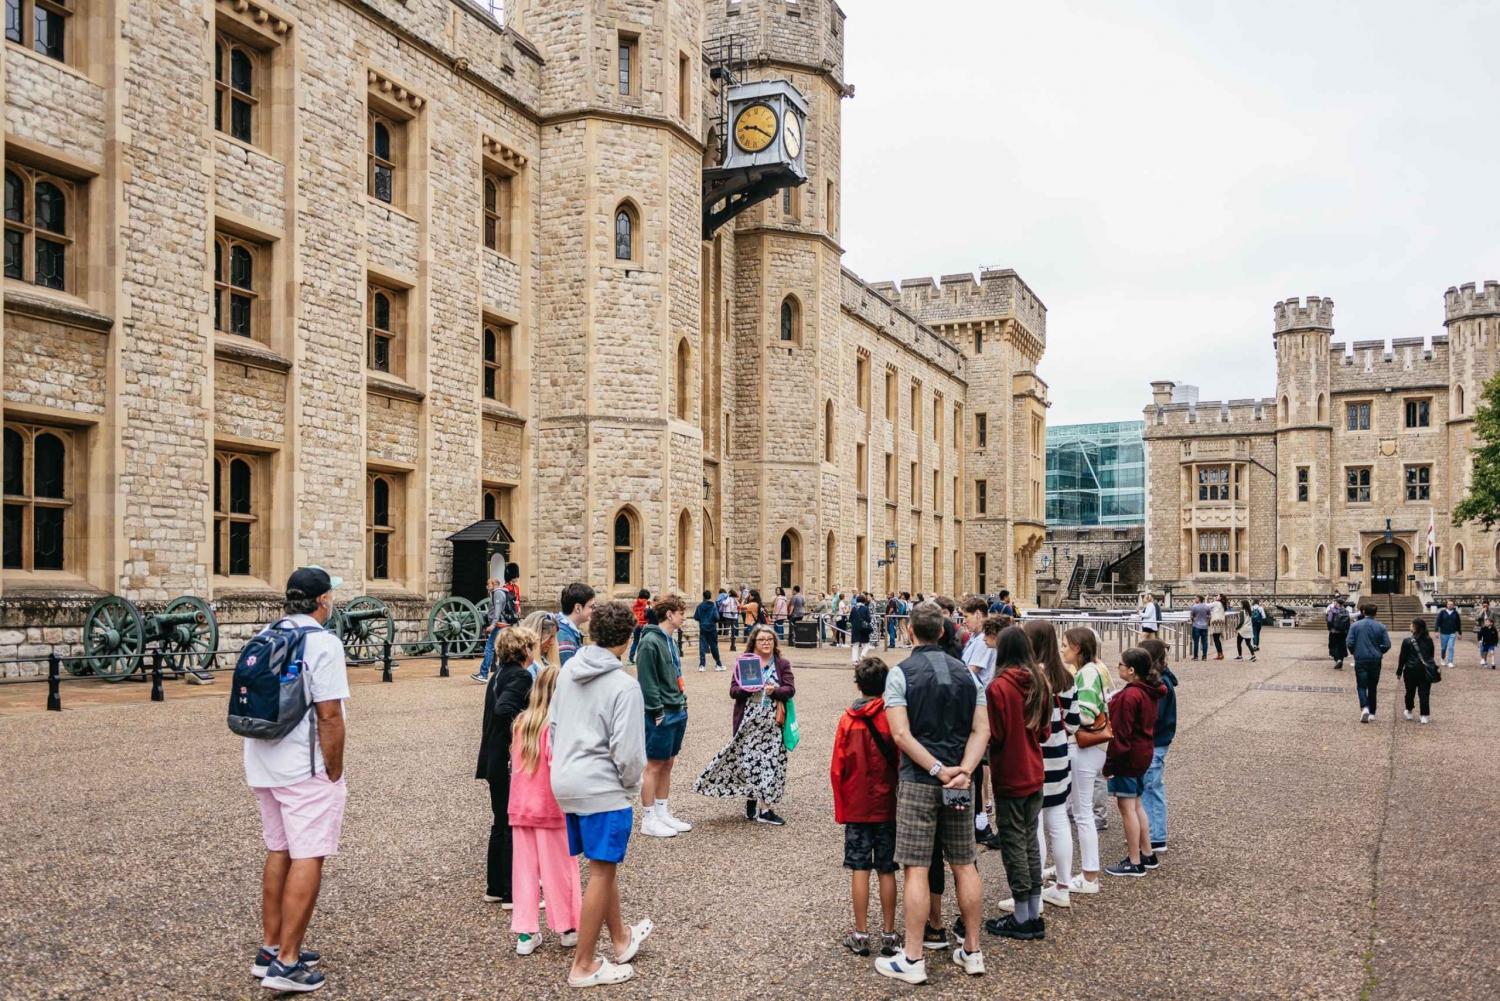 London: Tower of London Tour & Thames River Cruise